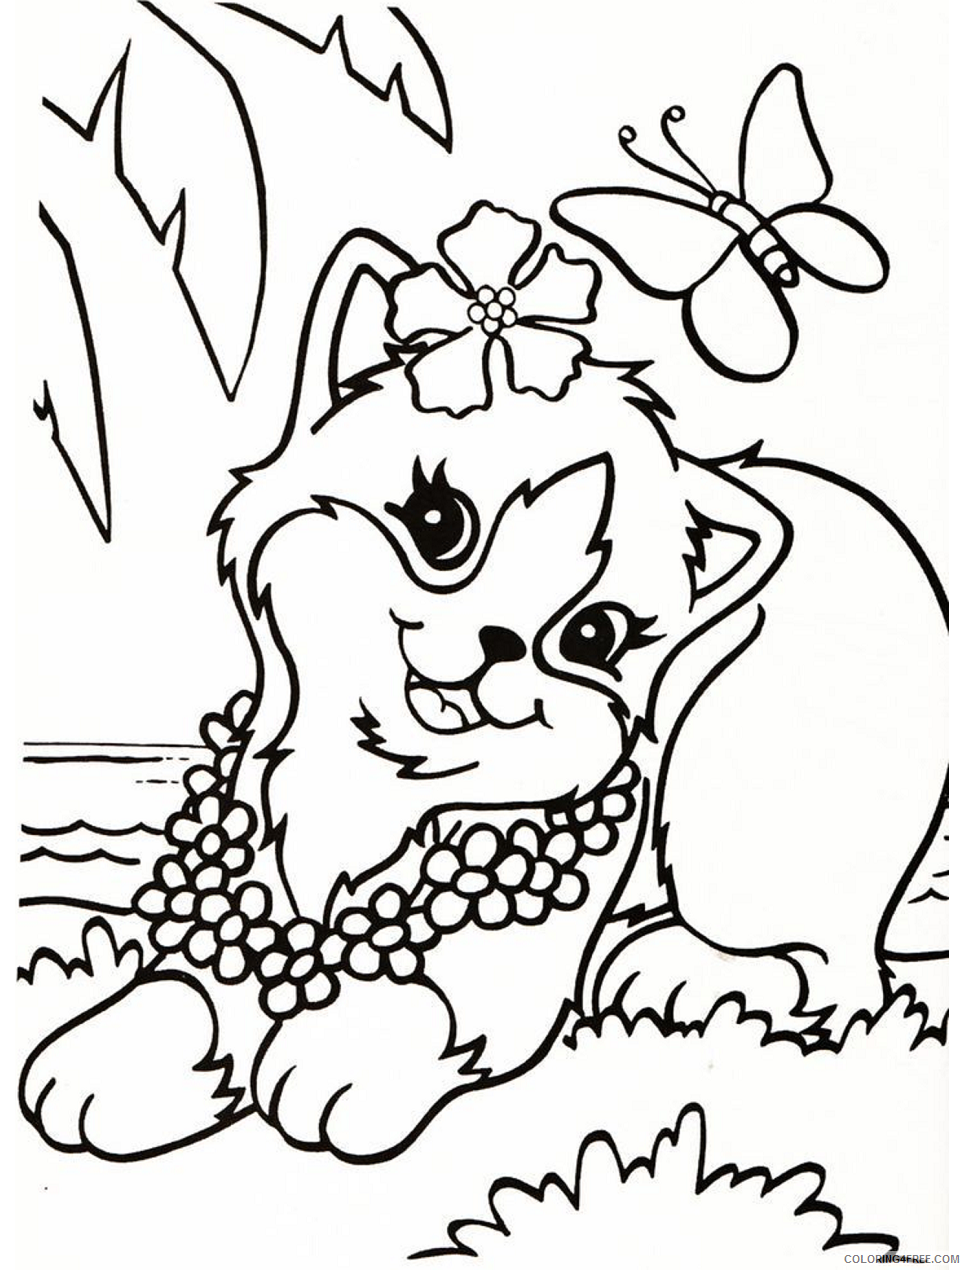 Lisa Frank Coloring Pages pretty_cat_lisa_frank Printable 2021 3883 Coloring4free